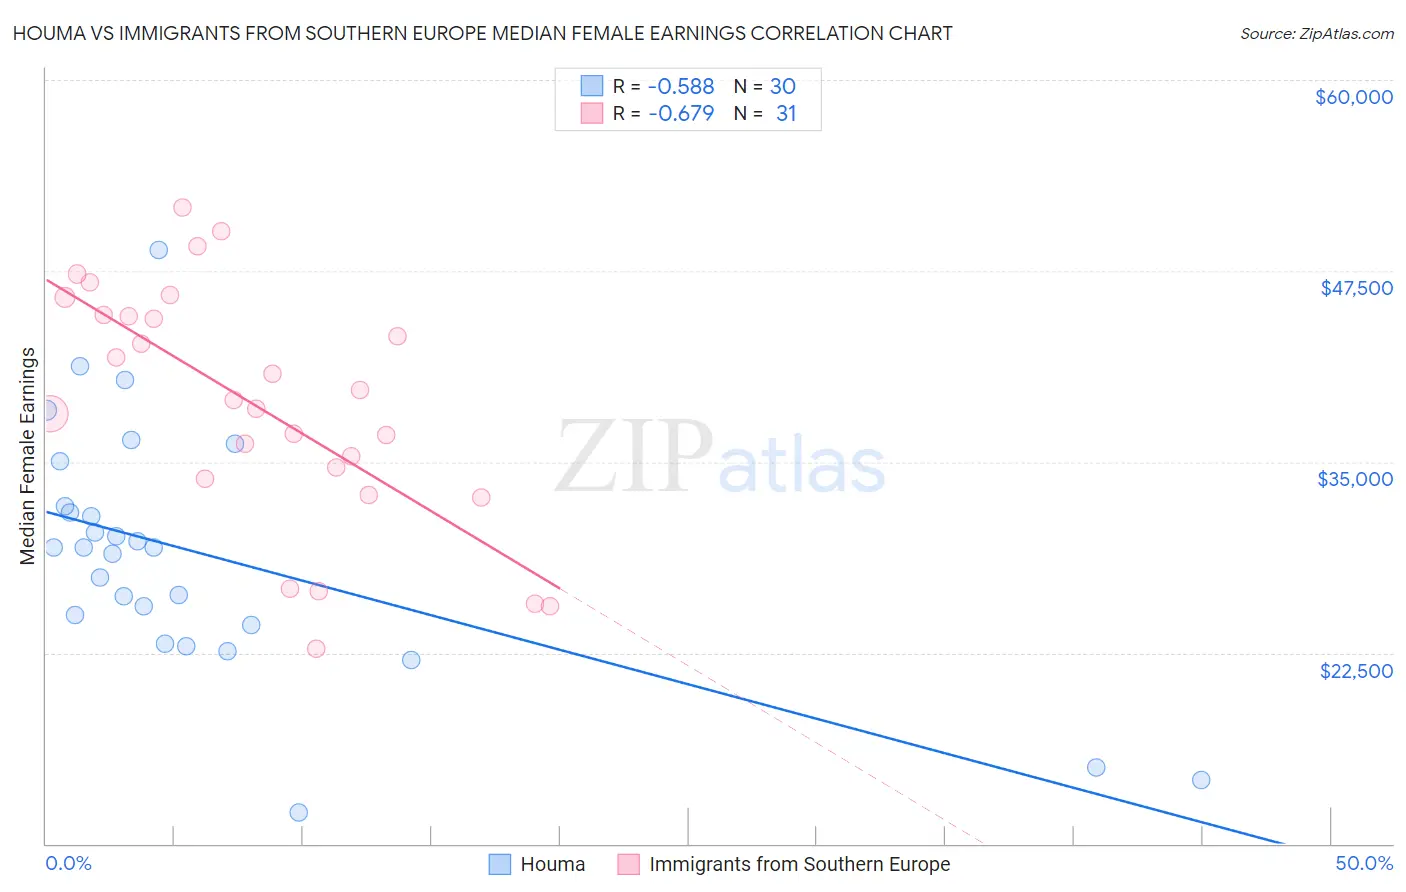 Houma vs Immigrants from Southern Europe Median Female Earnings